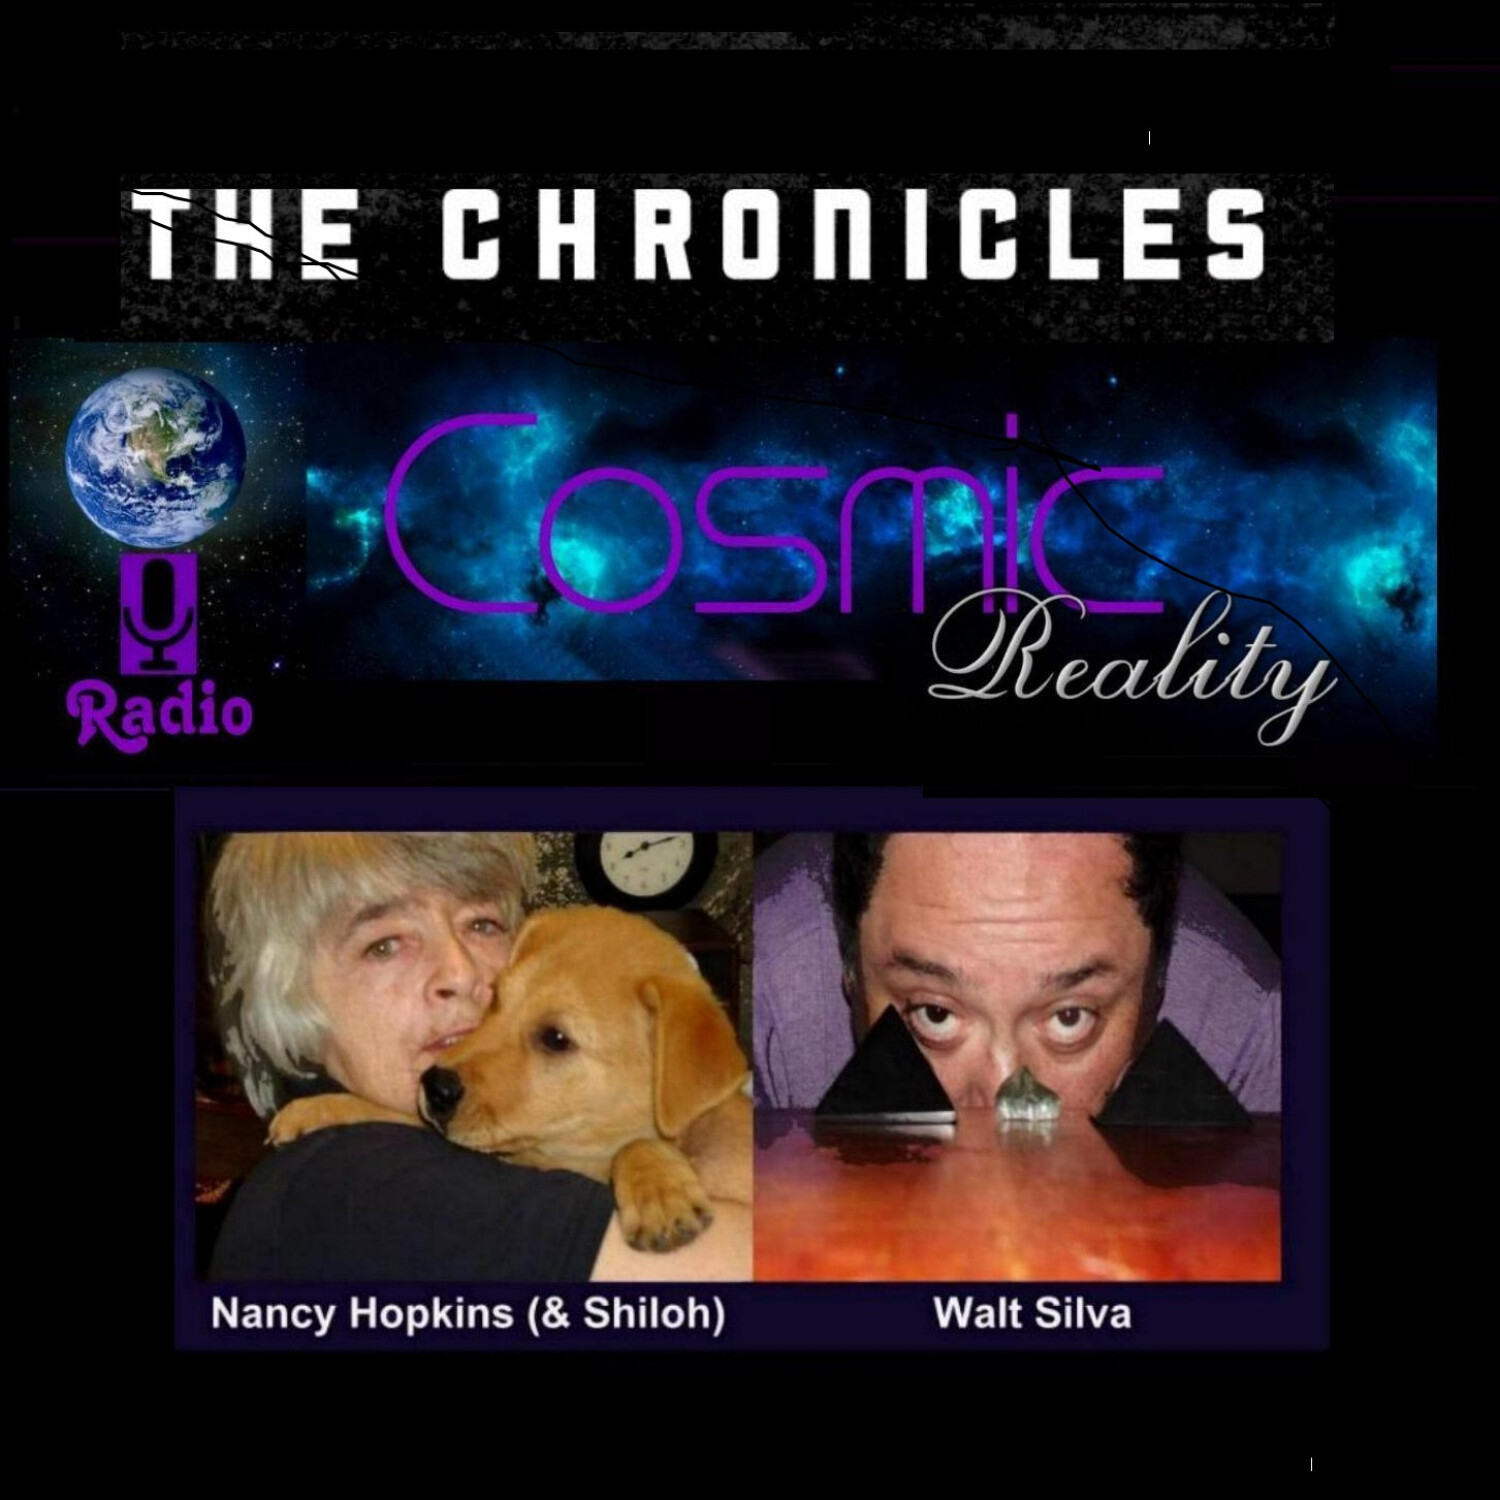 "COSMIC REALITY CHRONICLES" 10/22/2013 - NL Hopkins discussing her book COSMIC REALITY